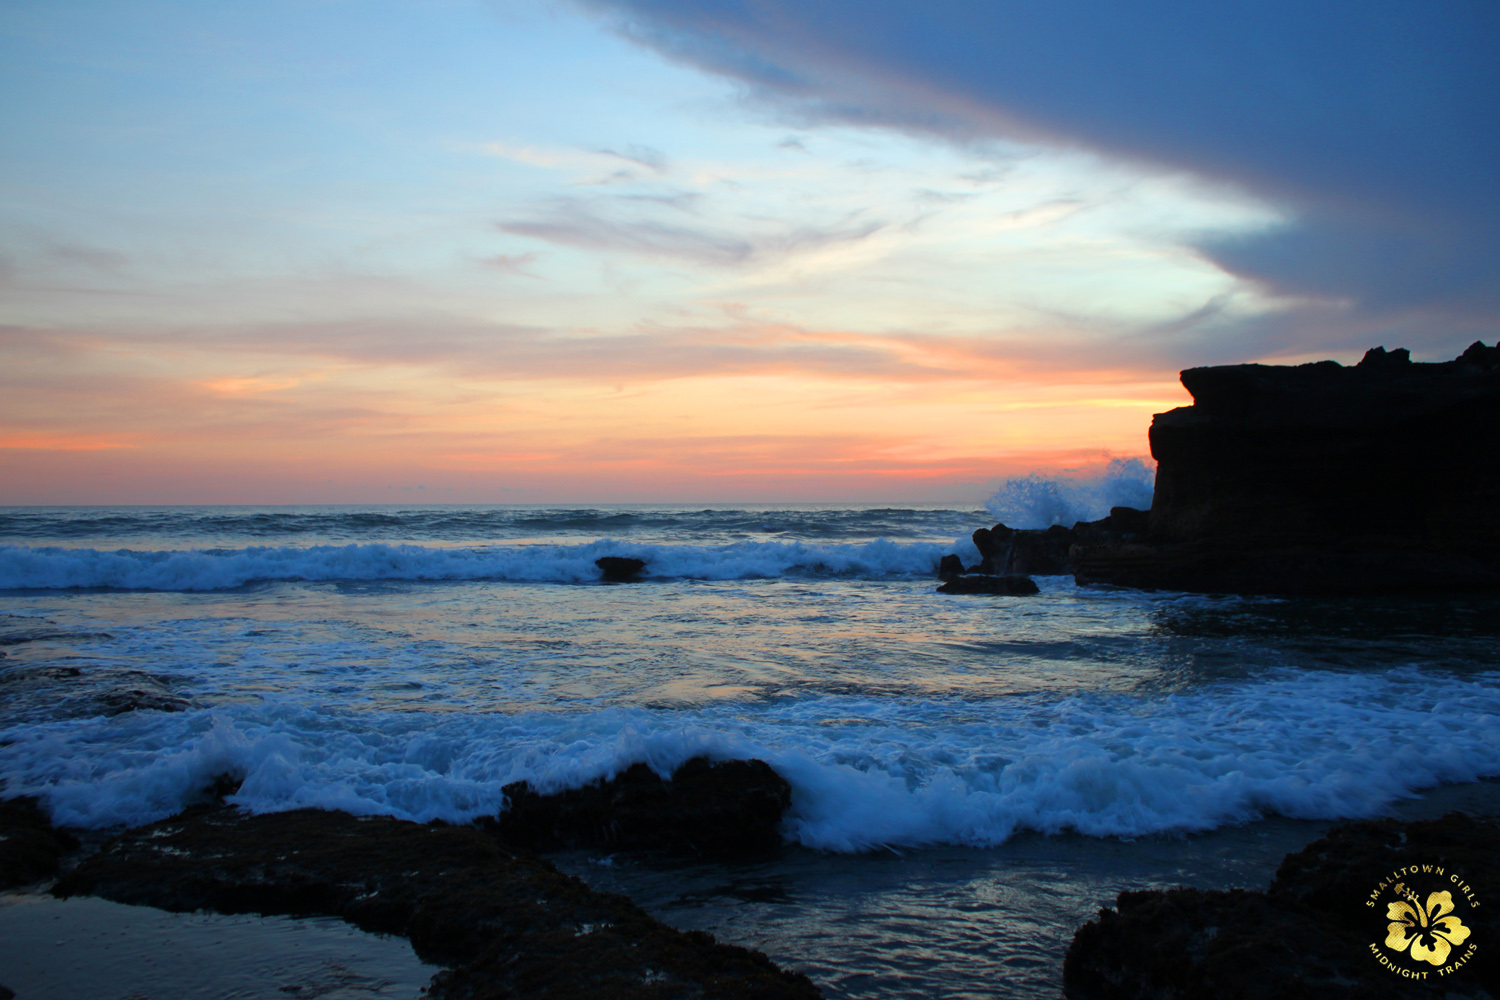 Our sunset visit to Tanah Lot was also facilitated by Mr. Wayan Adika of Bali Golden Tour